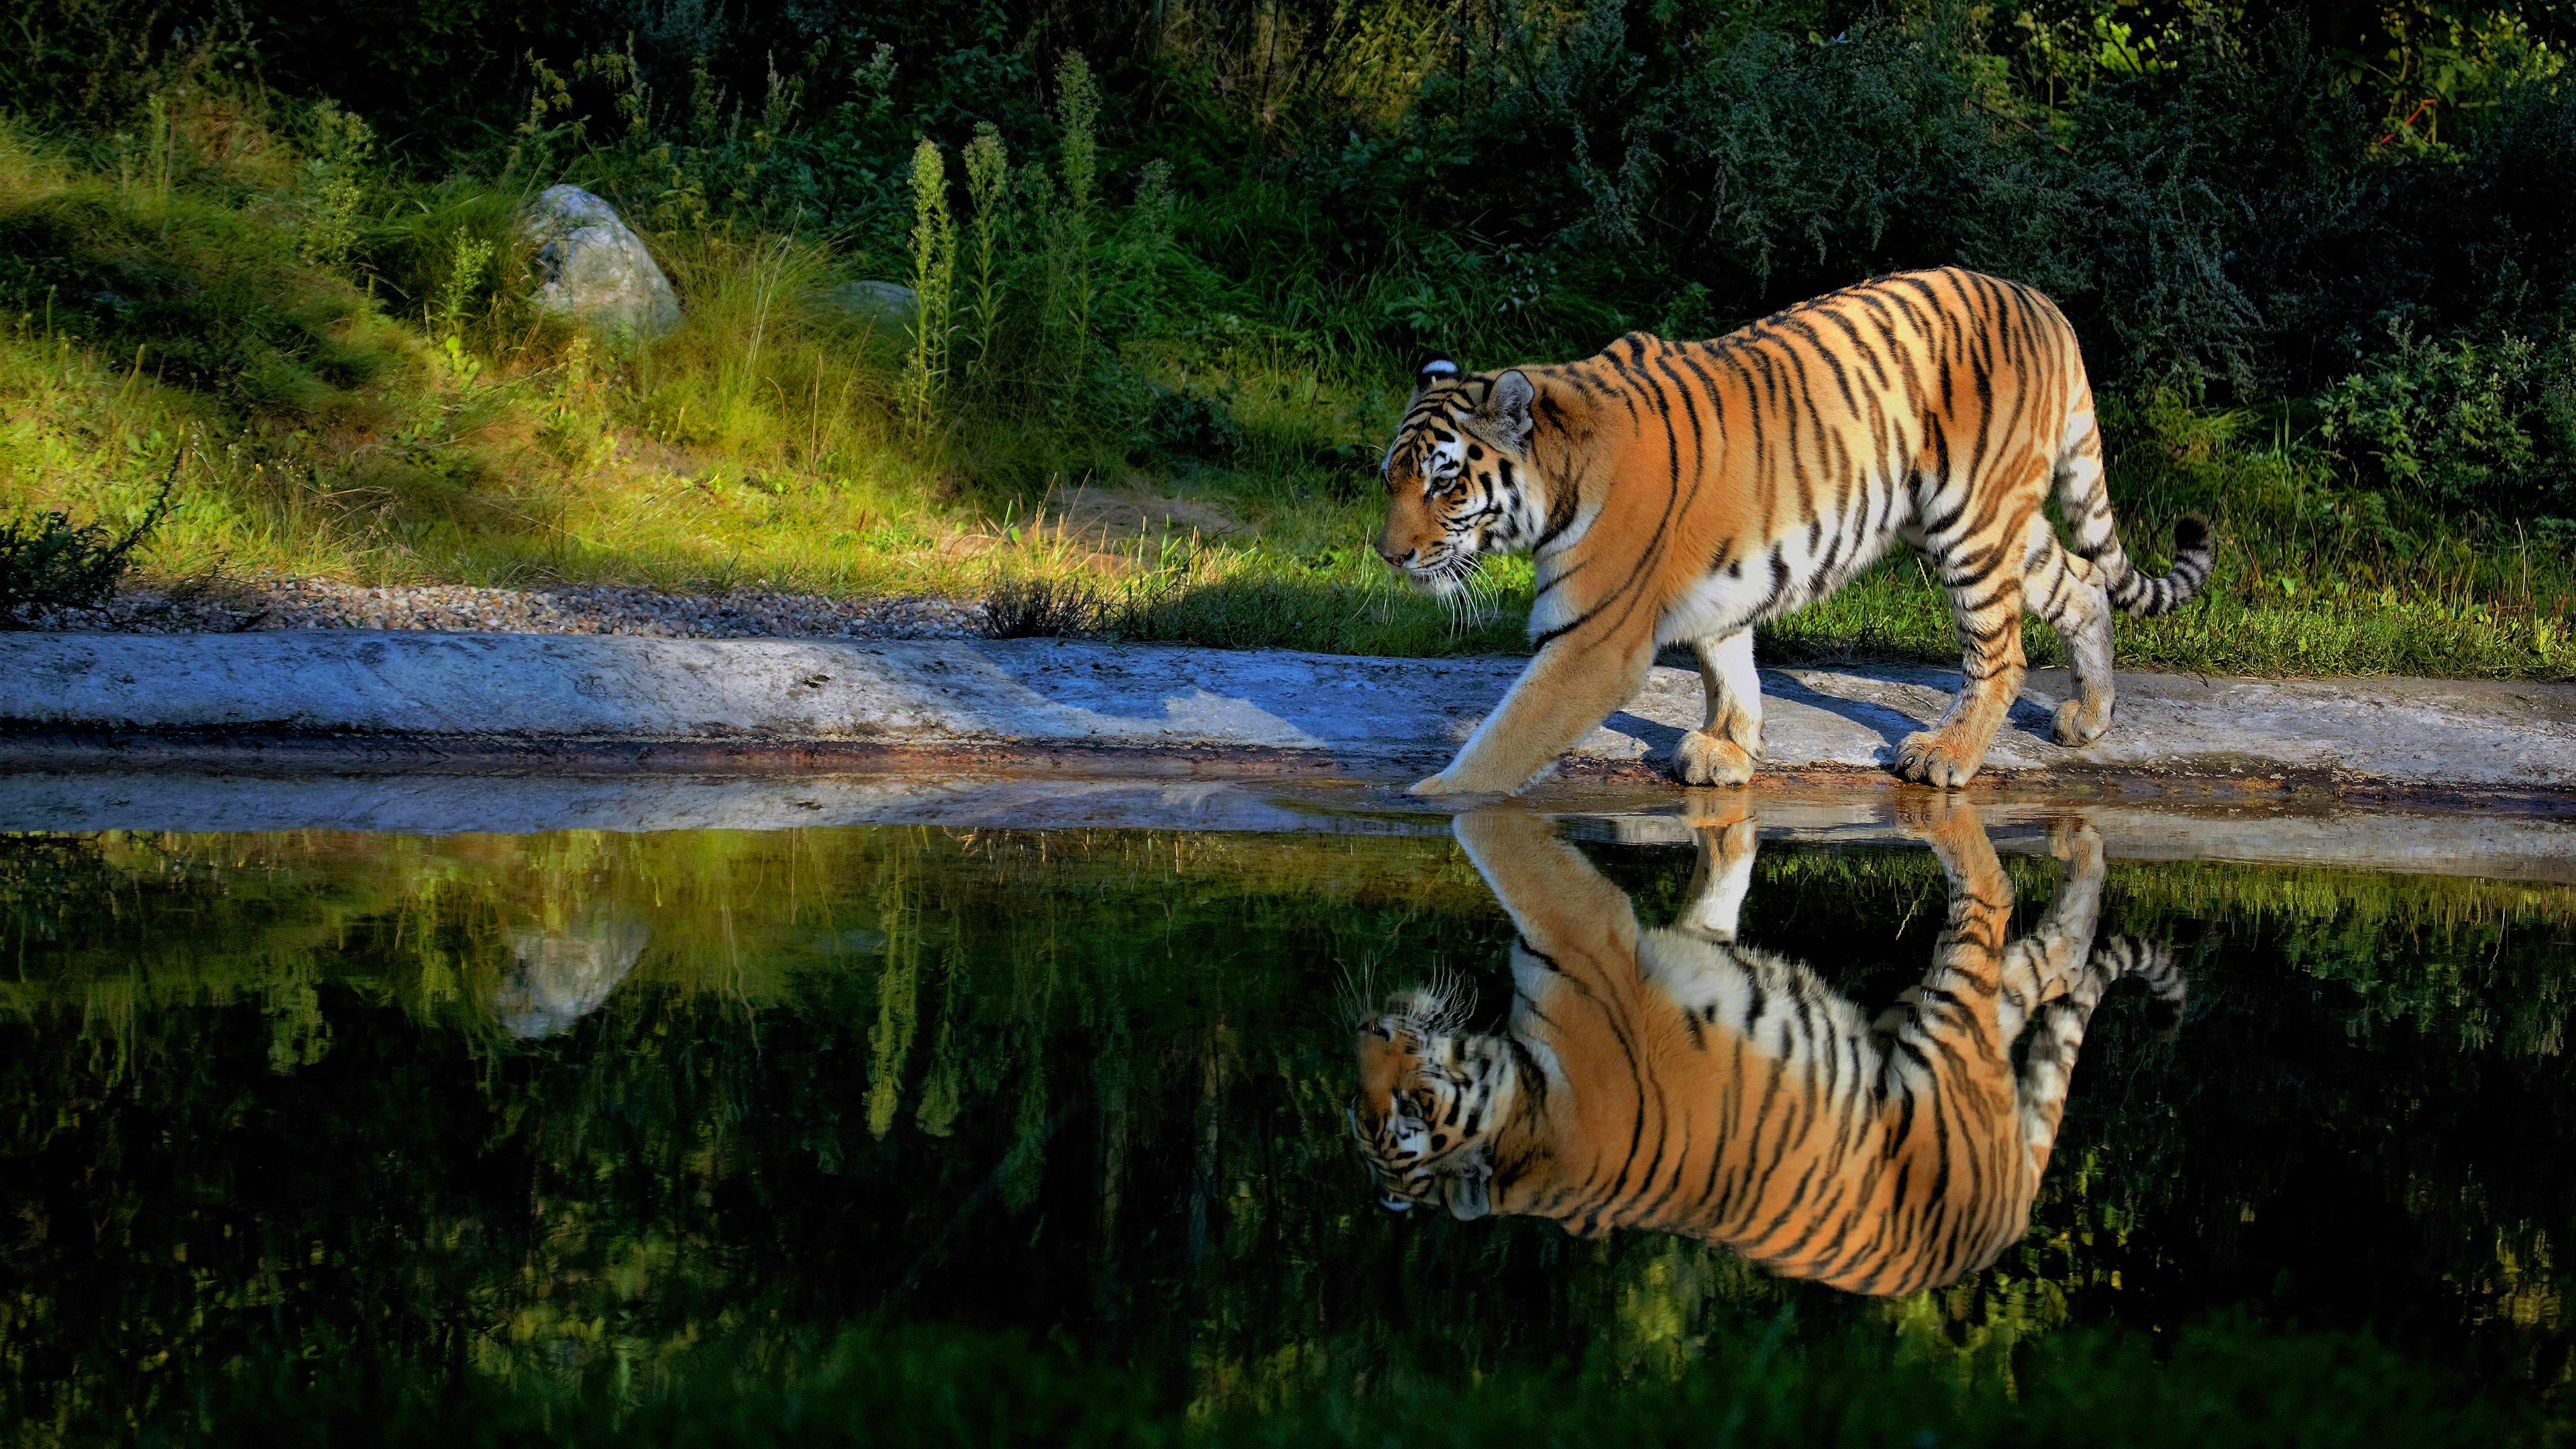 Tiger reflected in water